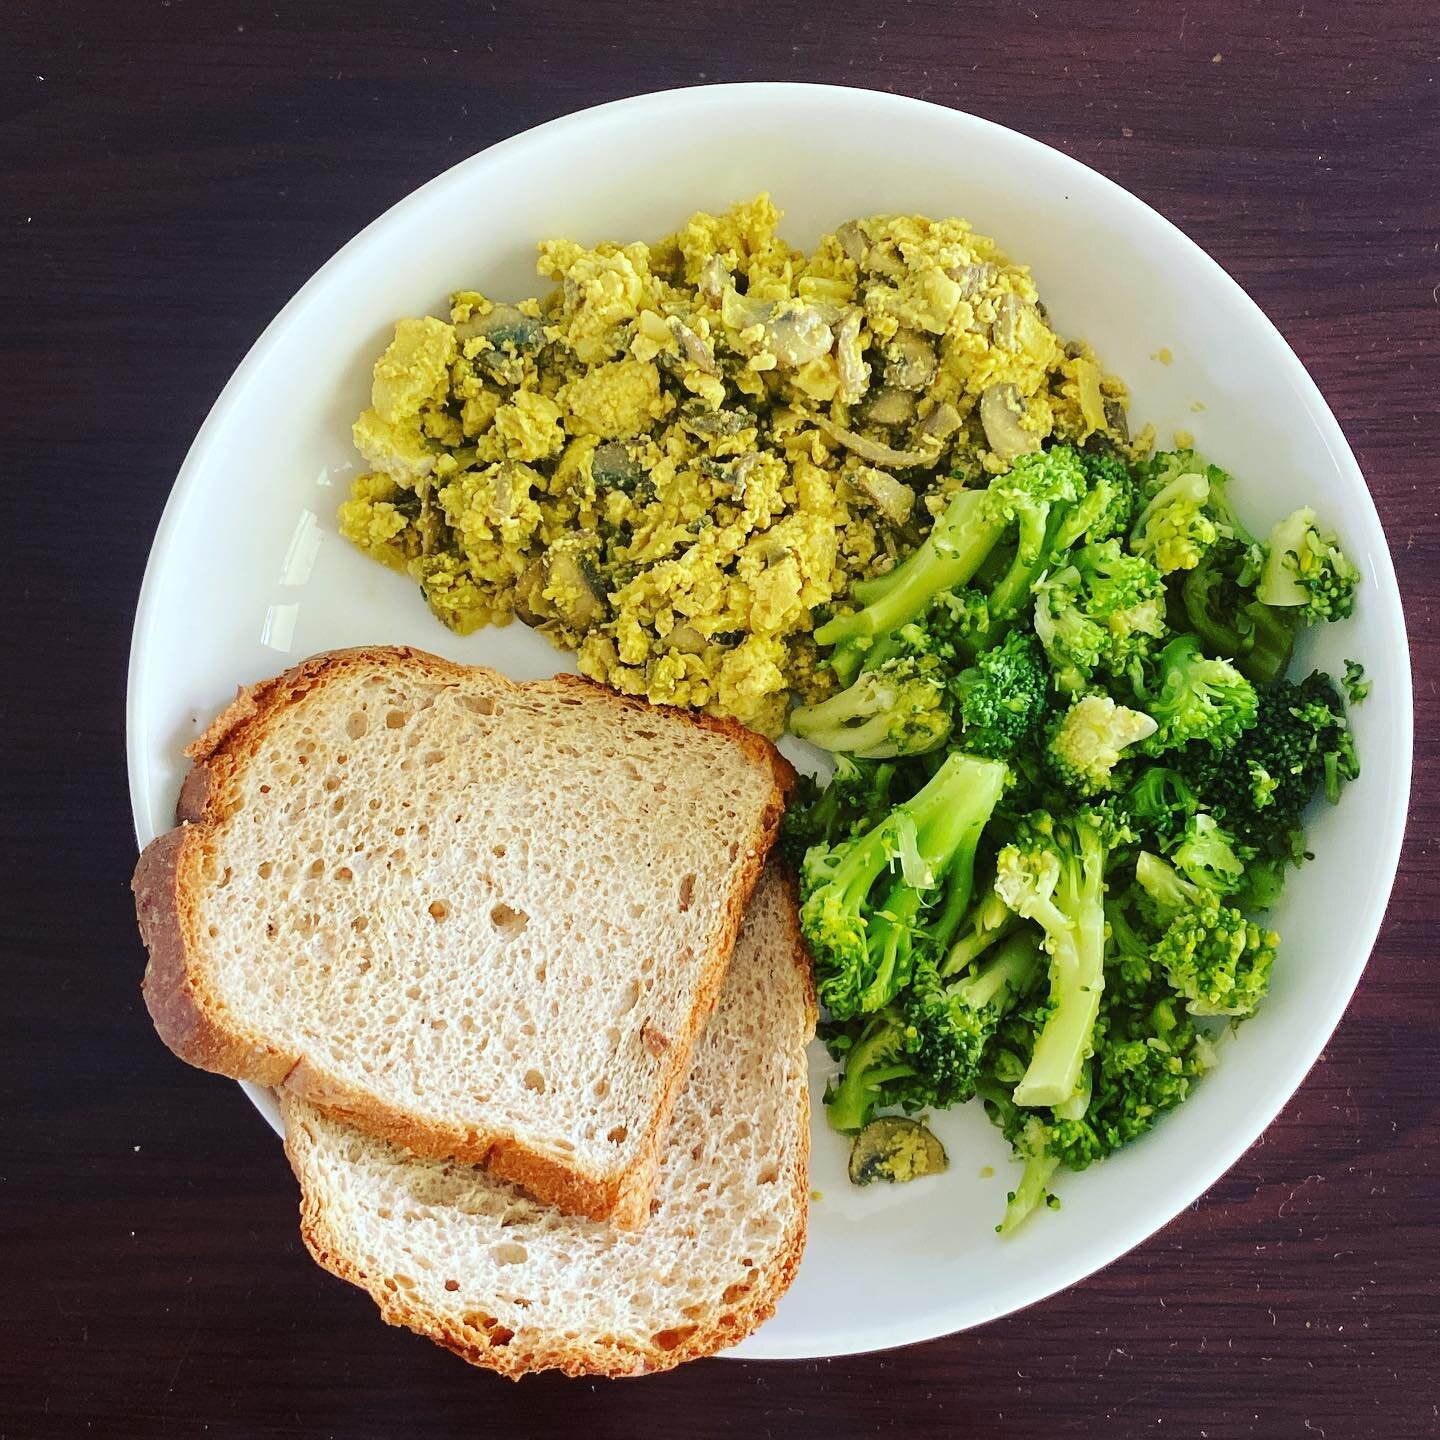 Simple, nutritious, delicious 🌱 

🍞 Dave&rsquo;s Killer Bread White Bread Done Right
🫘 Tofu scramble with onions, jalape&ntilde;os, and mushrooms
🥦 Steamed broccoli (I like to add some nutritional yeast and cayenne)

&bull;

&bull;

&bull;

#wfpb